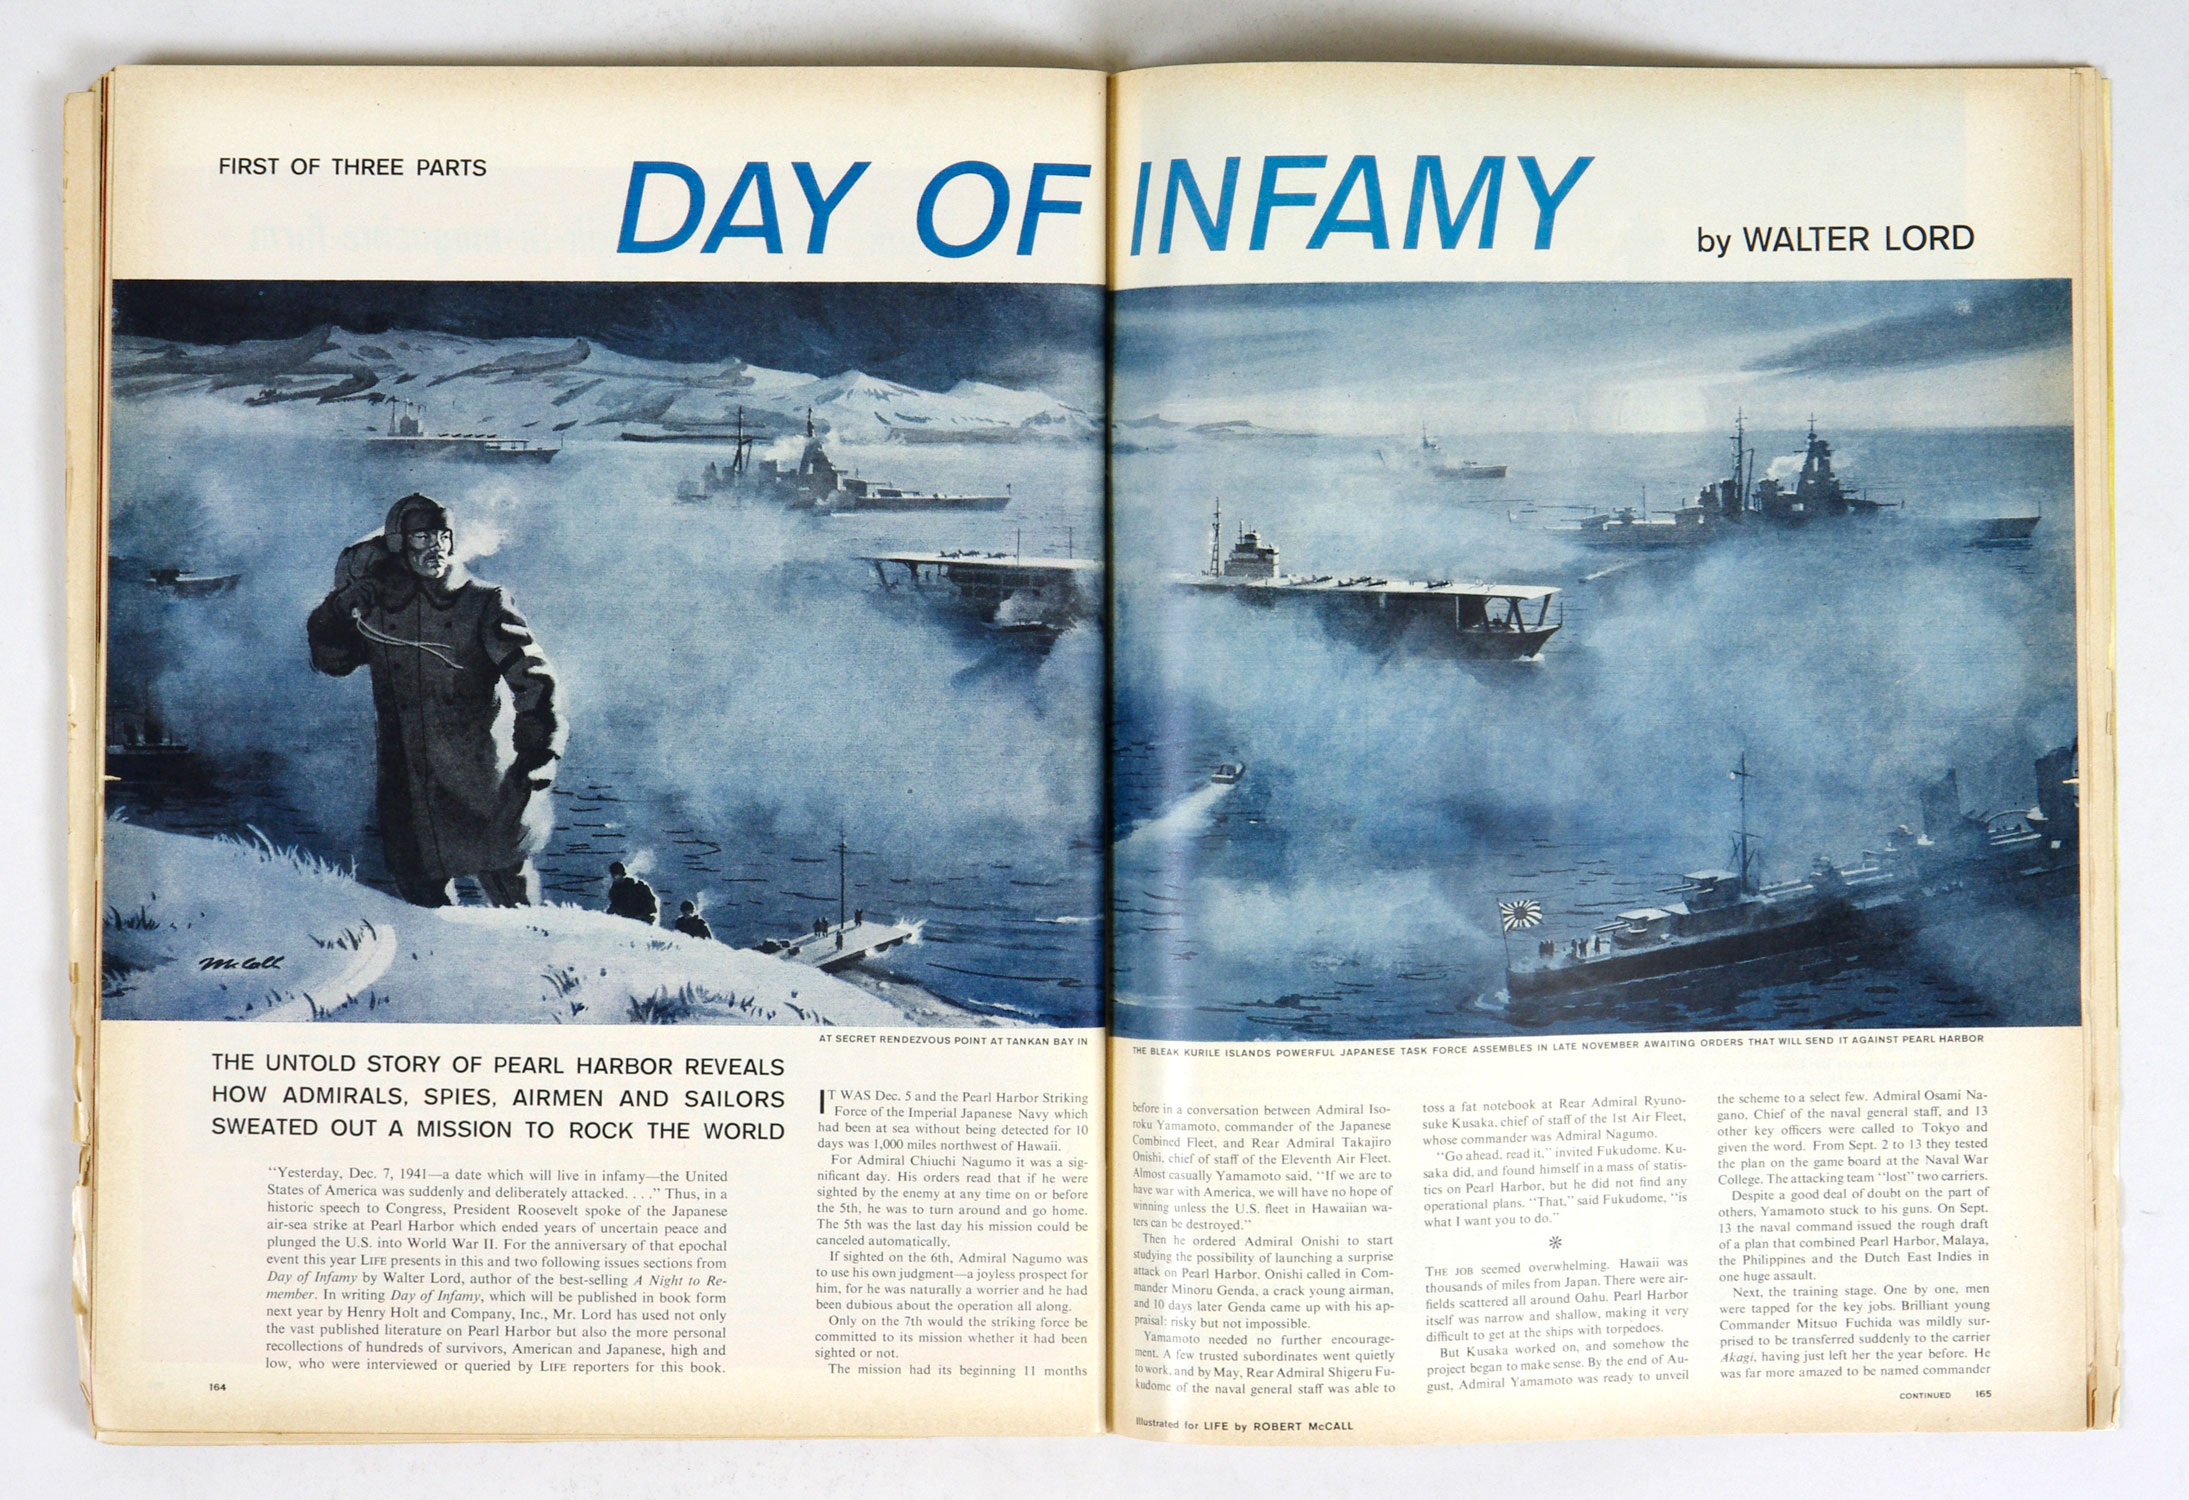 LIFE Magazine Back Issue 1956 December 3 Day of Infamy The Human Drama of Pearl Harbor